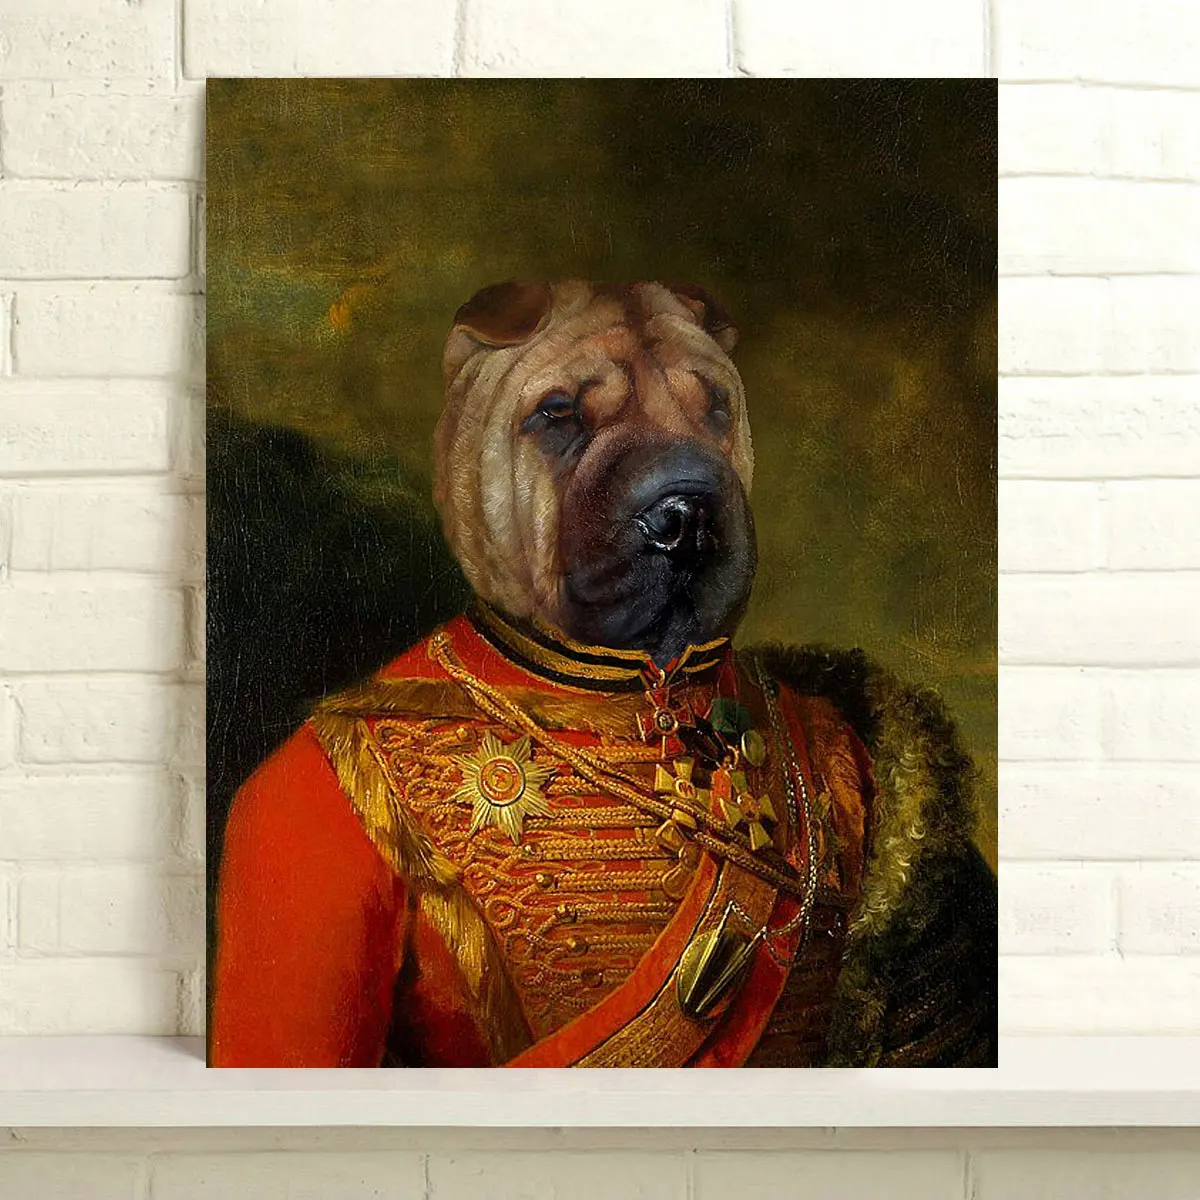 

Hand-painted Animals Oil Painting Home Decor Wall Art on Canvas General Shar Pei 24x30inch Canvas Wall Art